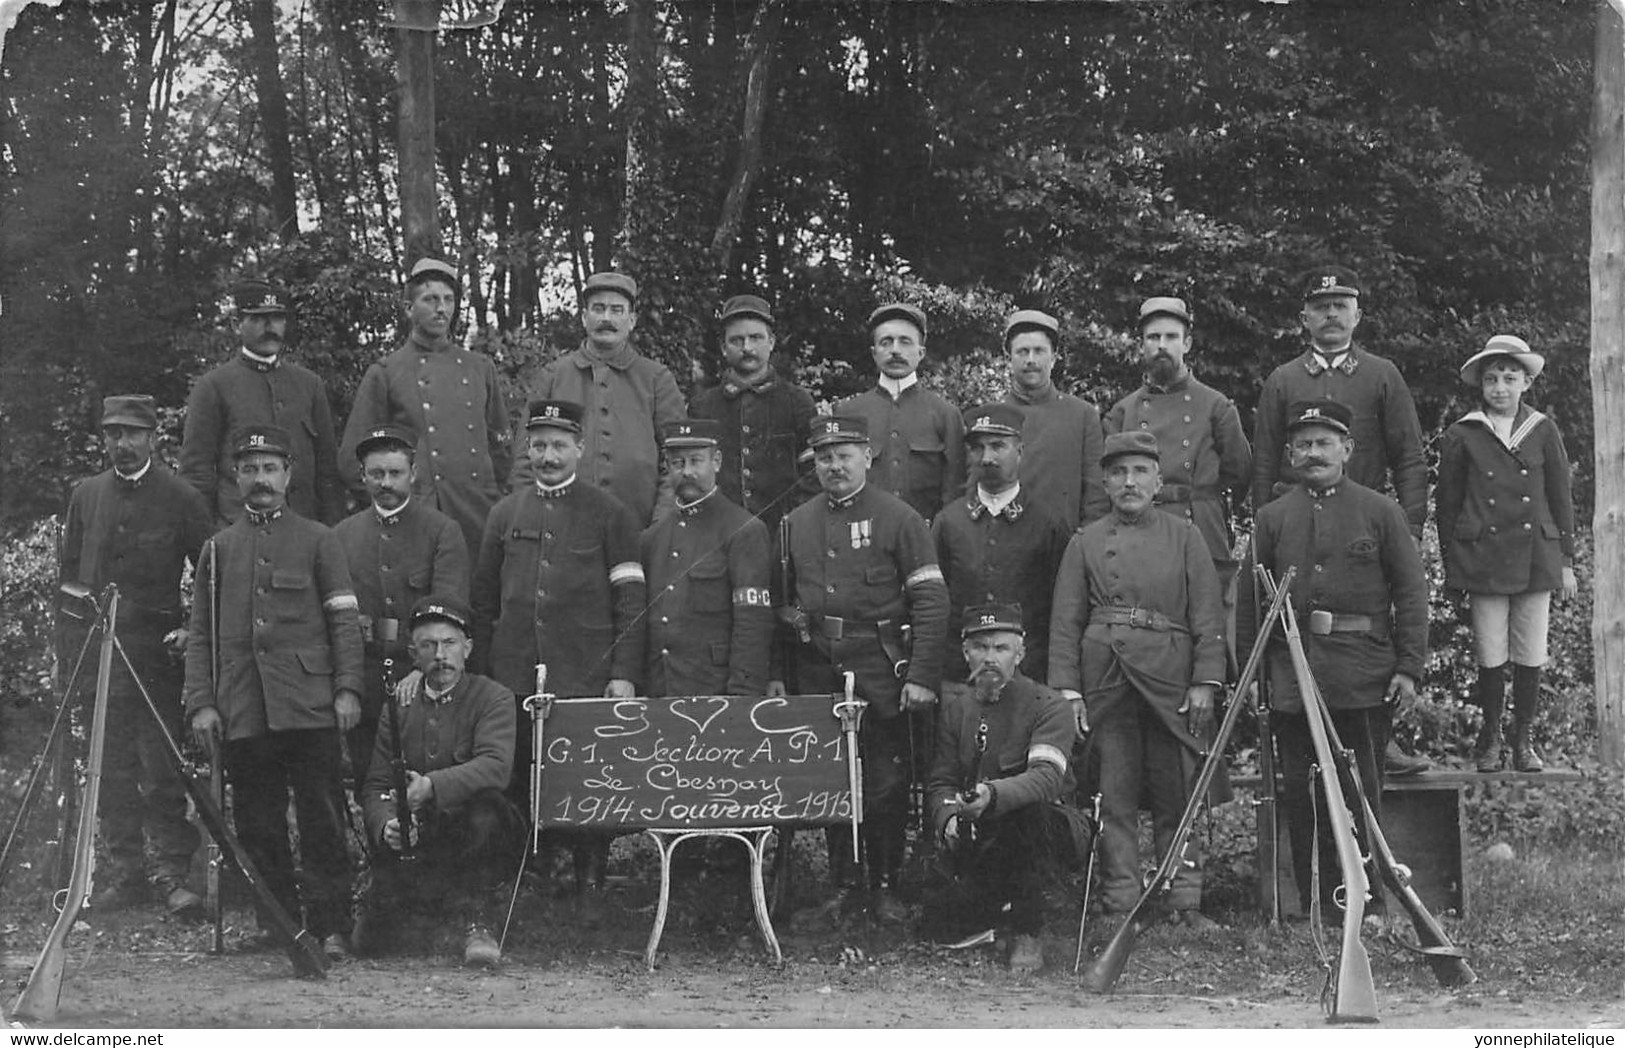 78 - YVELINES - LE CHESNAY - Carte Photo Souvenir Militaires, G1 Section A.P1 1914-1915 - Superbe - 10585 - Le Chesnay